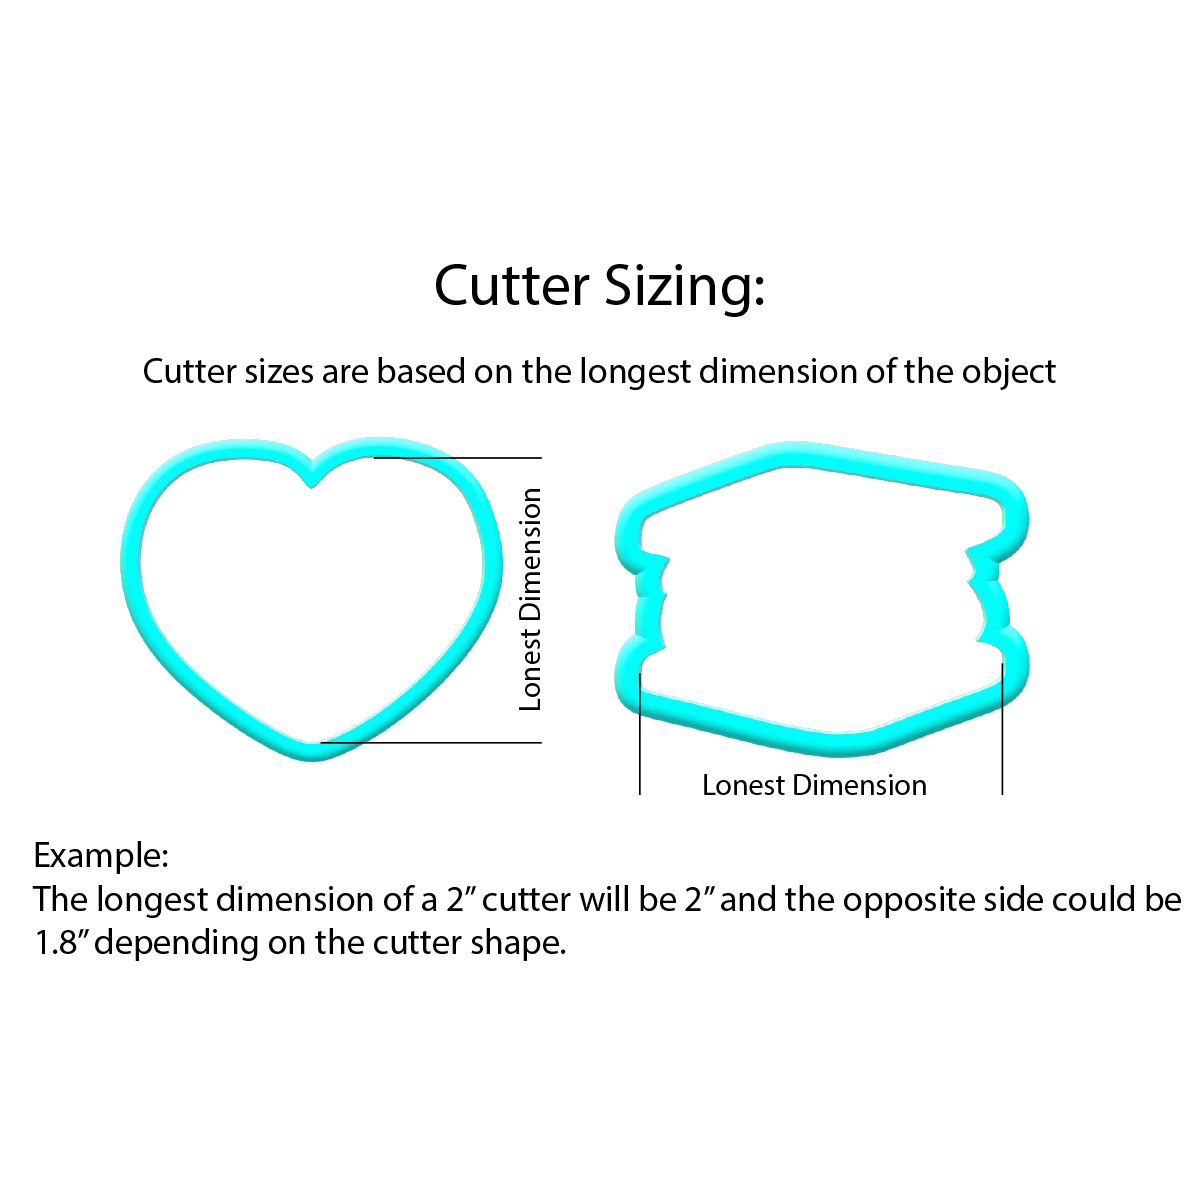 Heart Balloons Cookie Cutters | STL Files